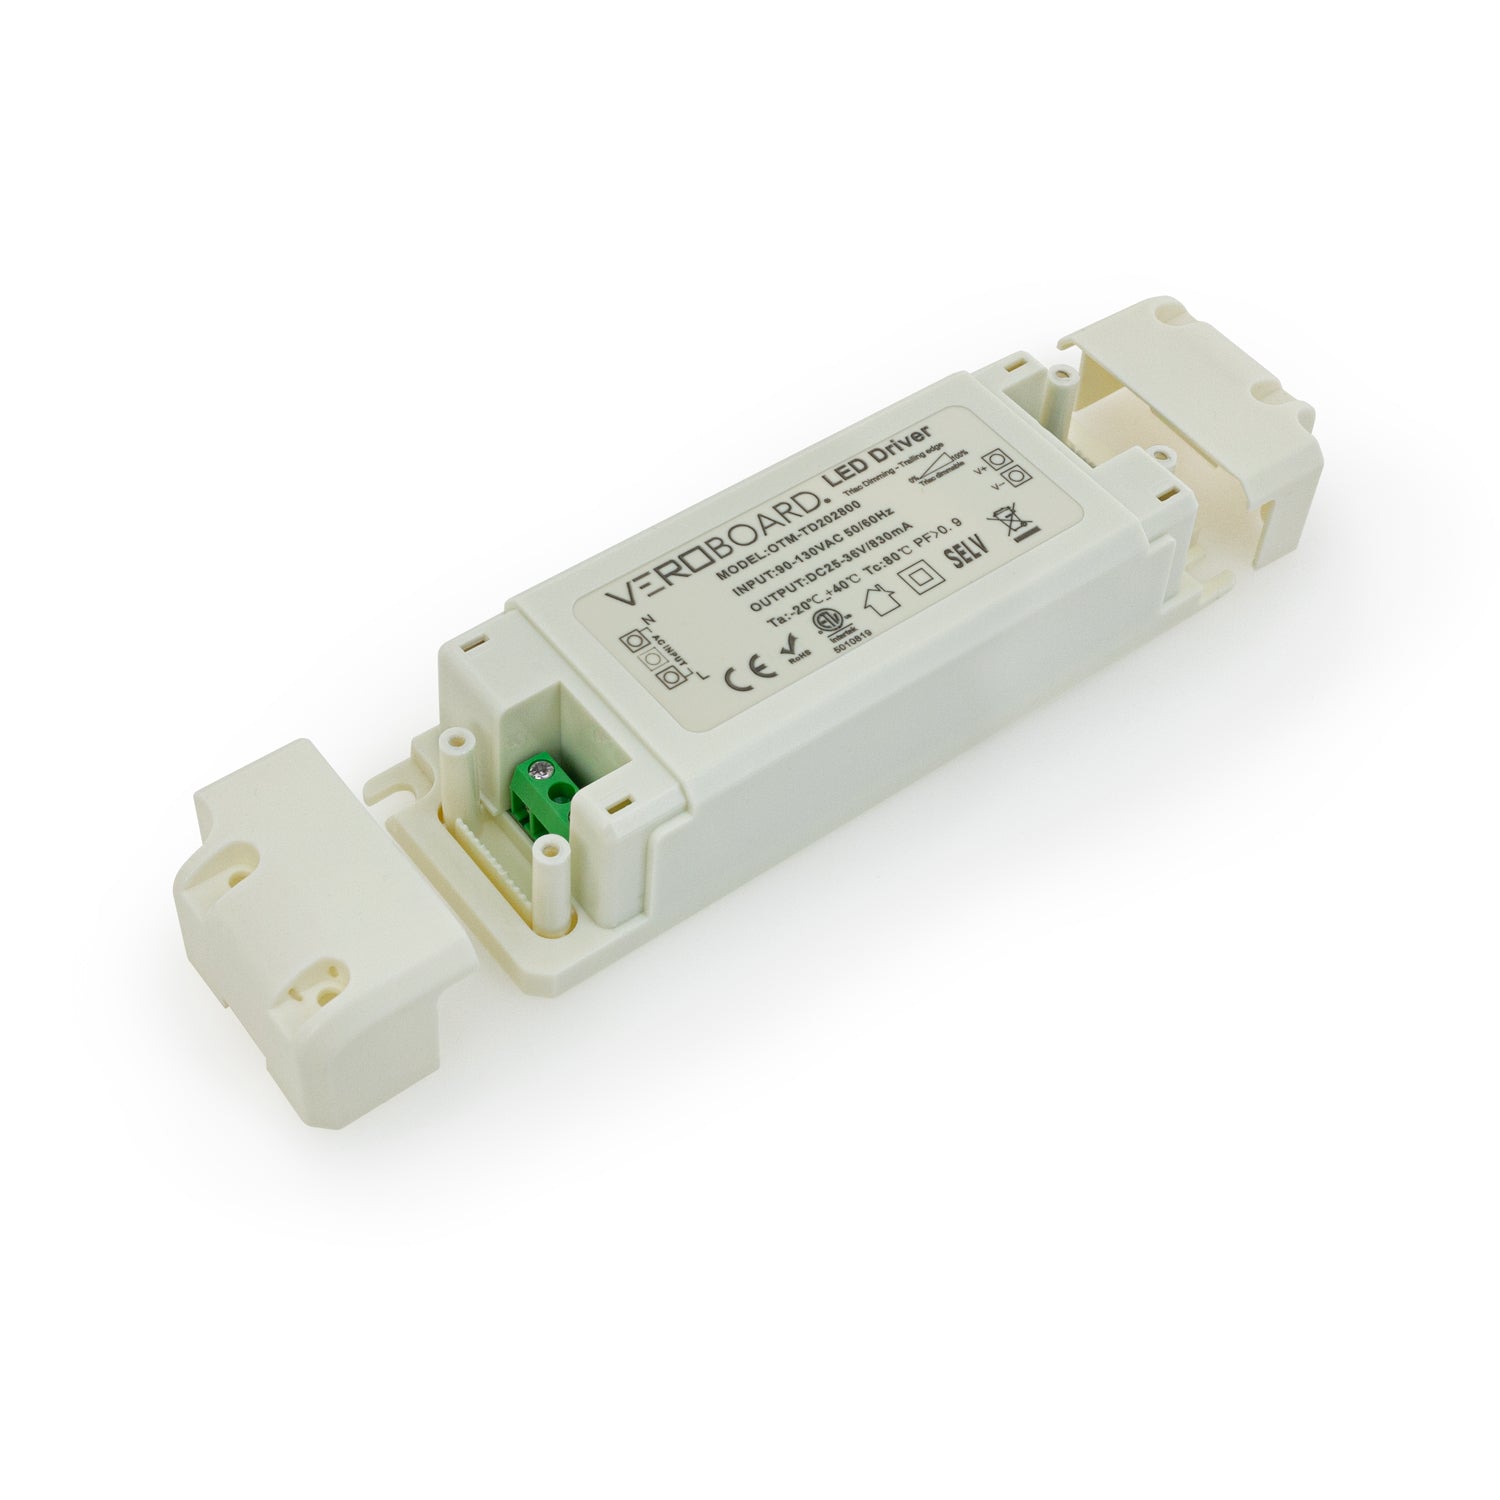 Constant Current 830ma 25-36V 28W Dimmable OTM-TD202800-830-28, Veroboard